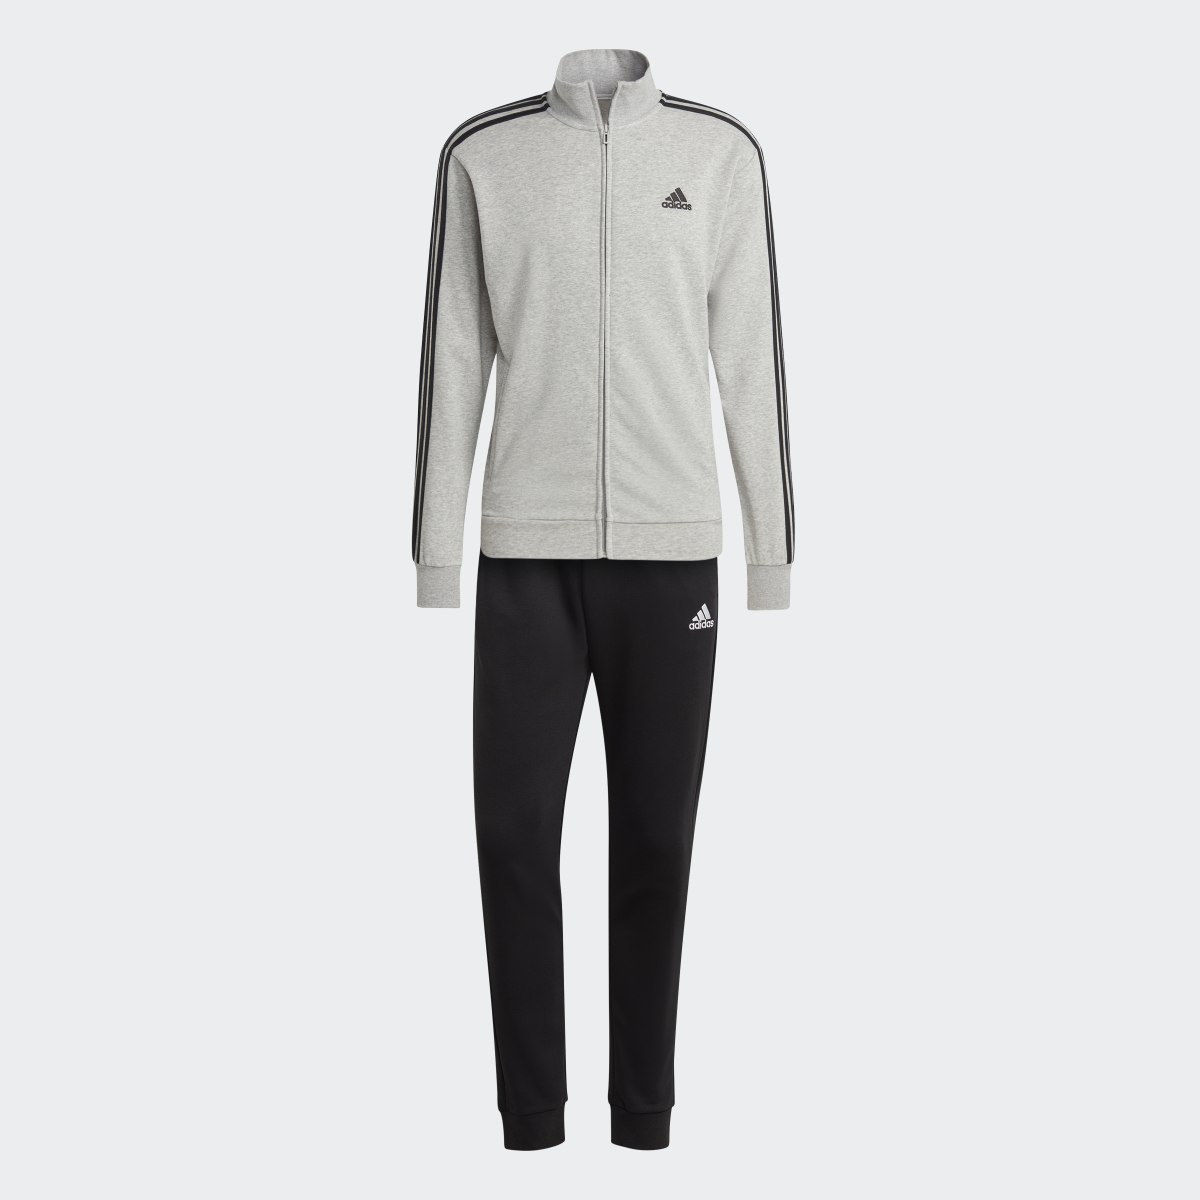 Adidas Basic 3-Stripes French Terry Tracksuit. 5